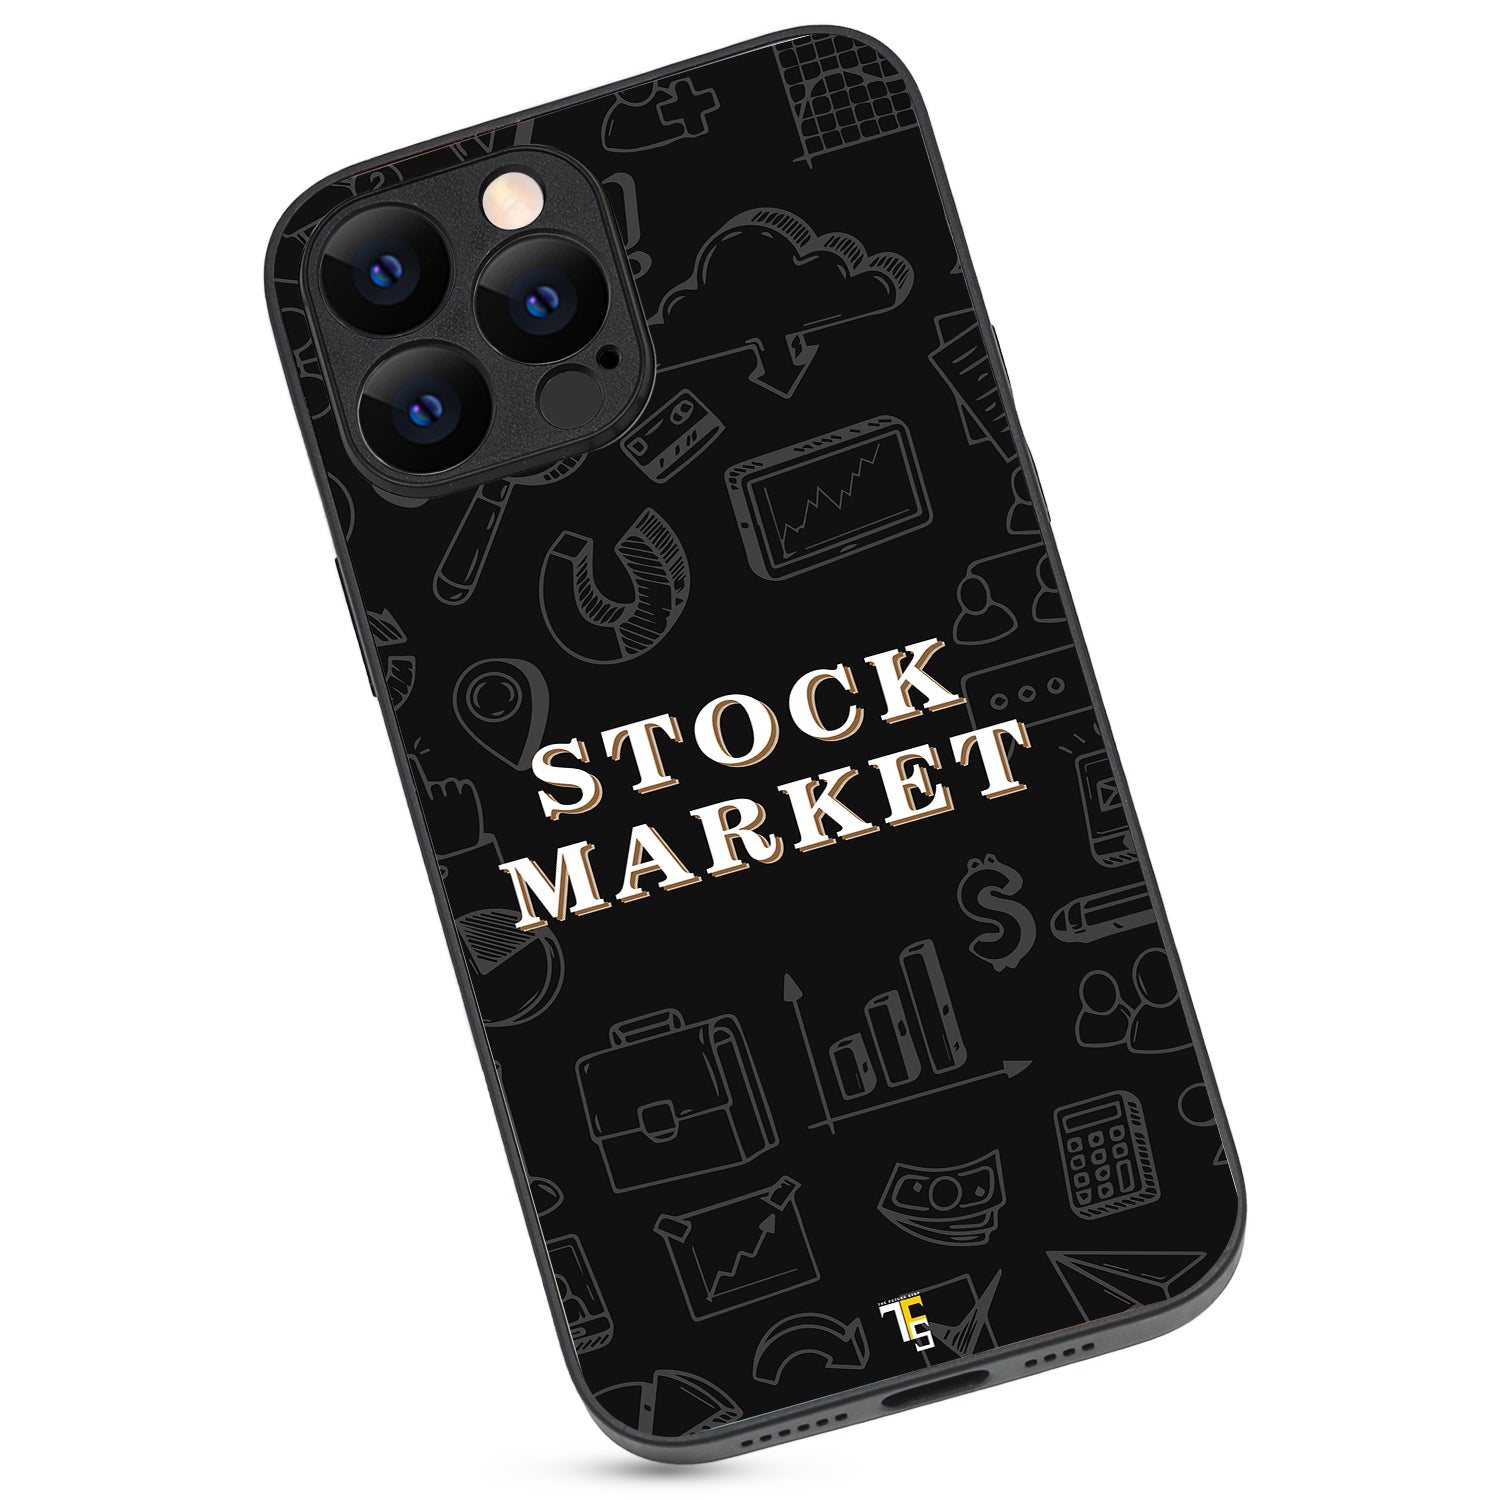 Stock Market Trading iPhone 13 Pro Max Case